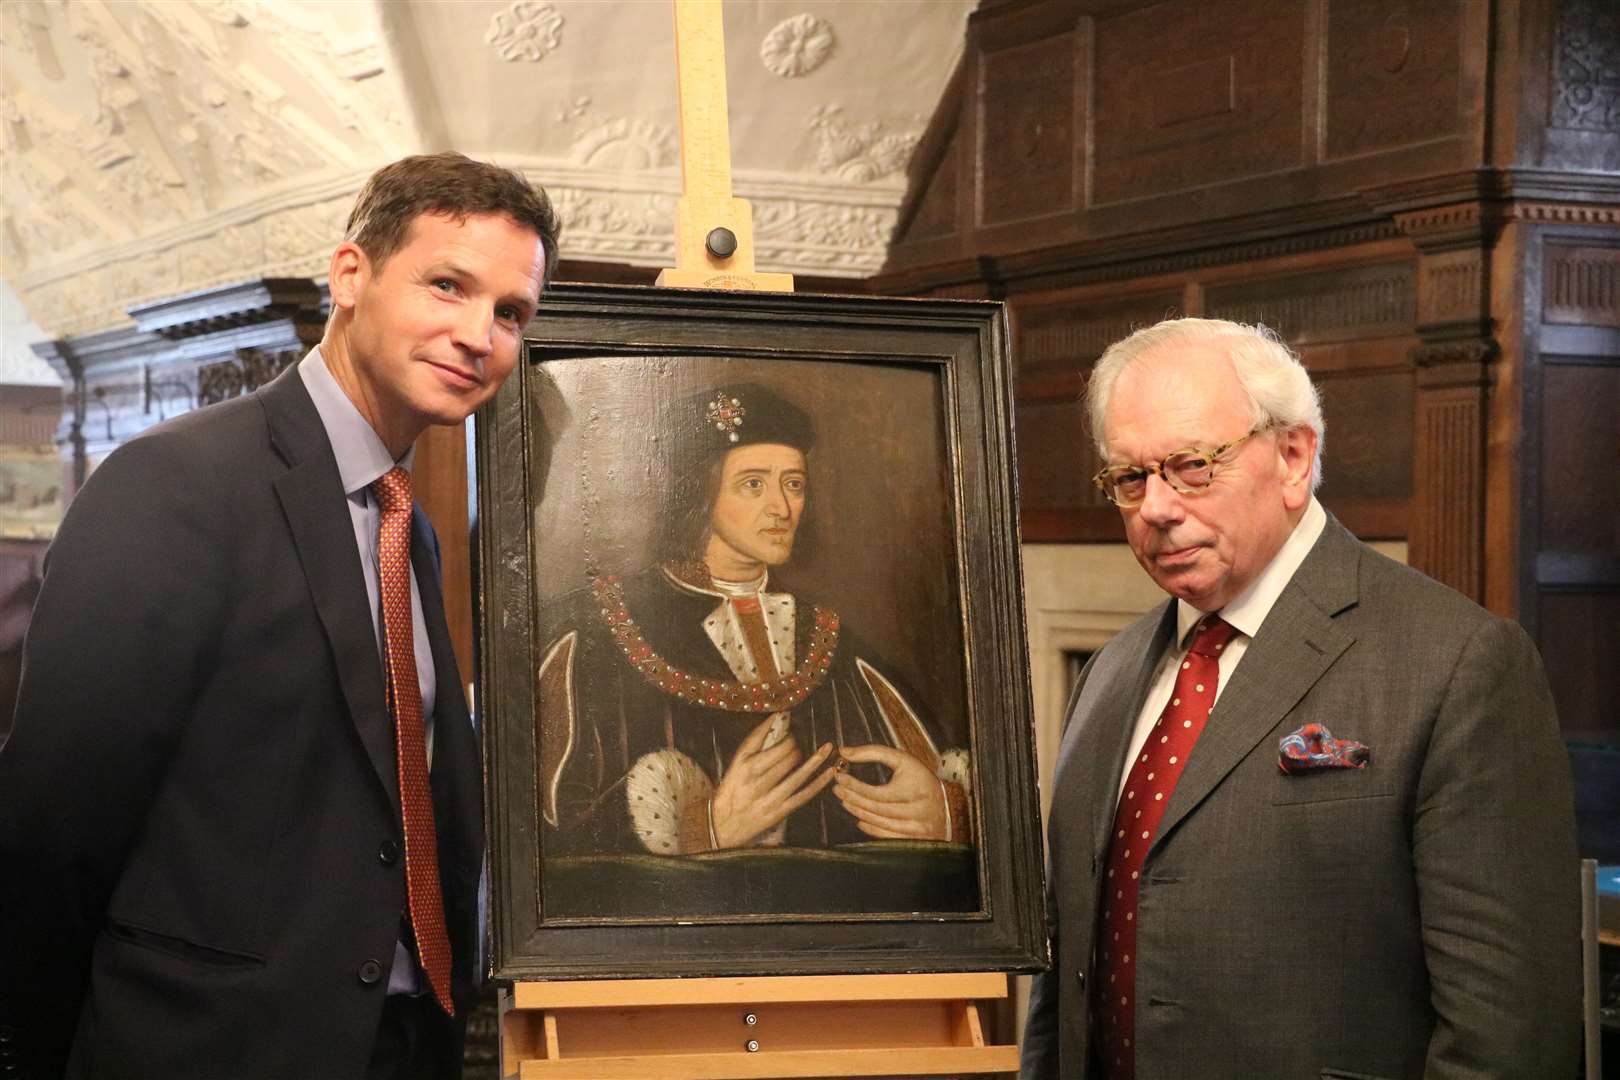 Duncan Lesley, the CEO of Hever Castle, with Dr David Starkey and the portrait